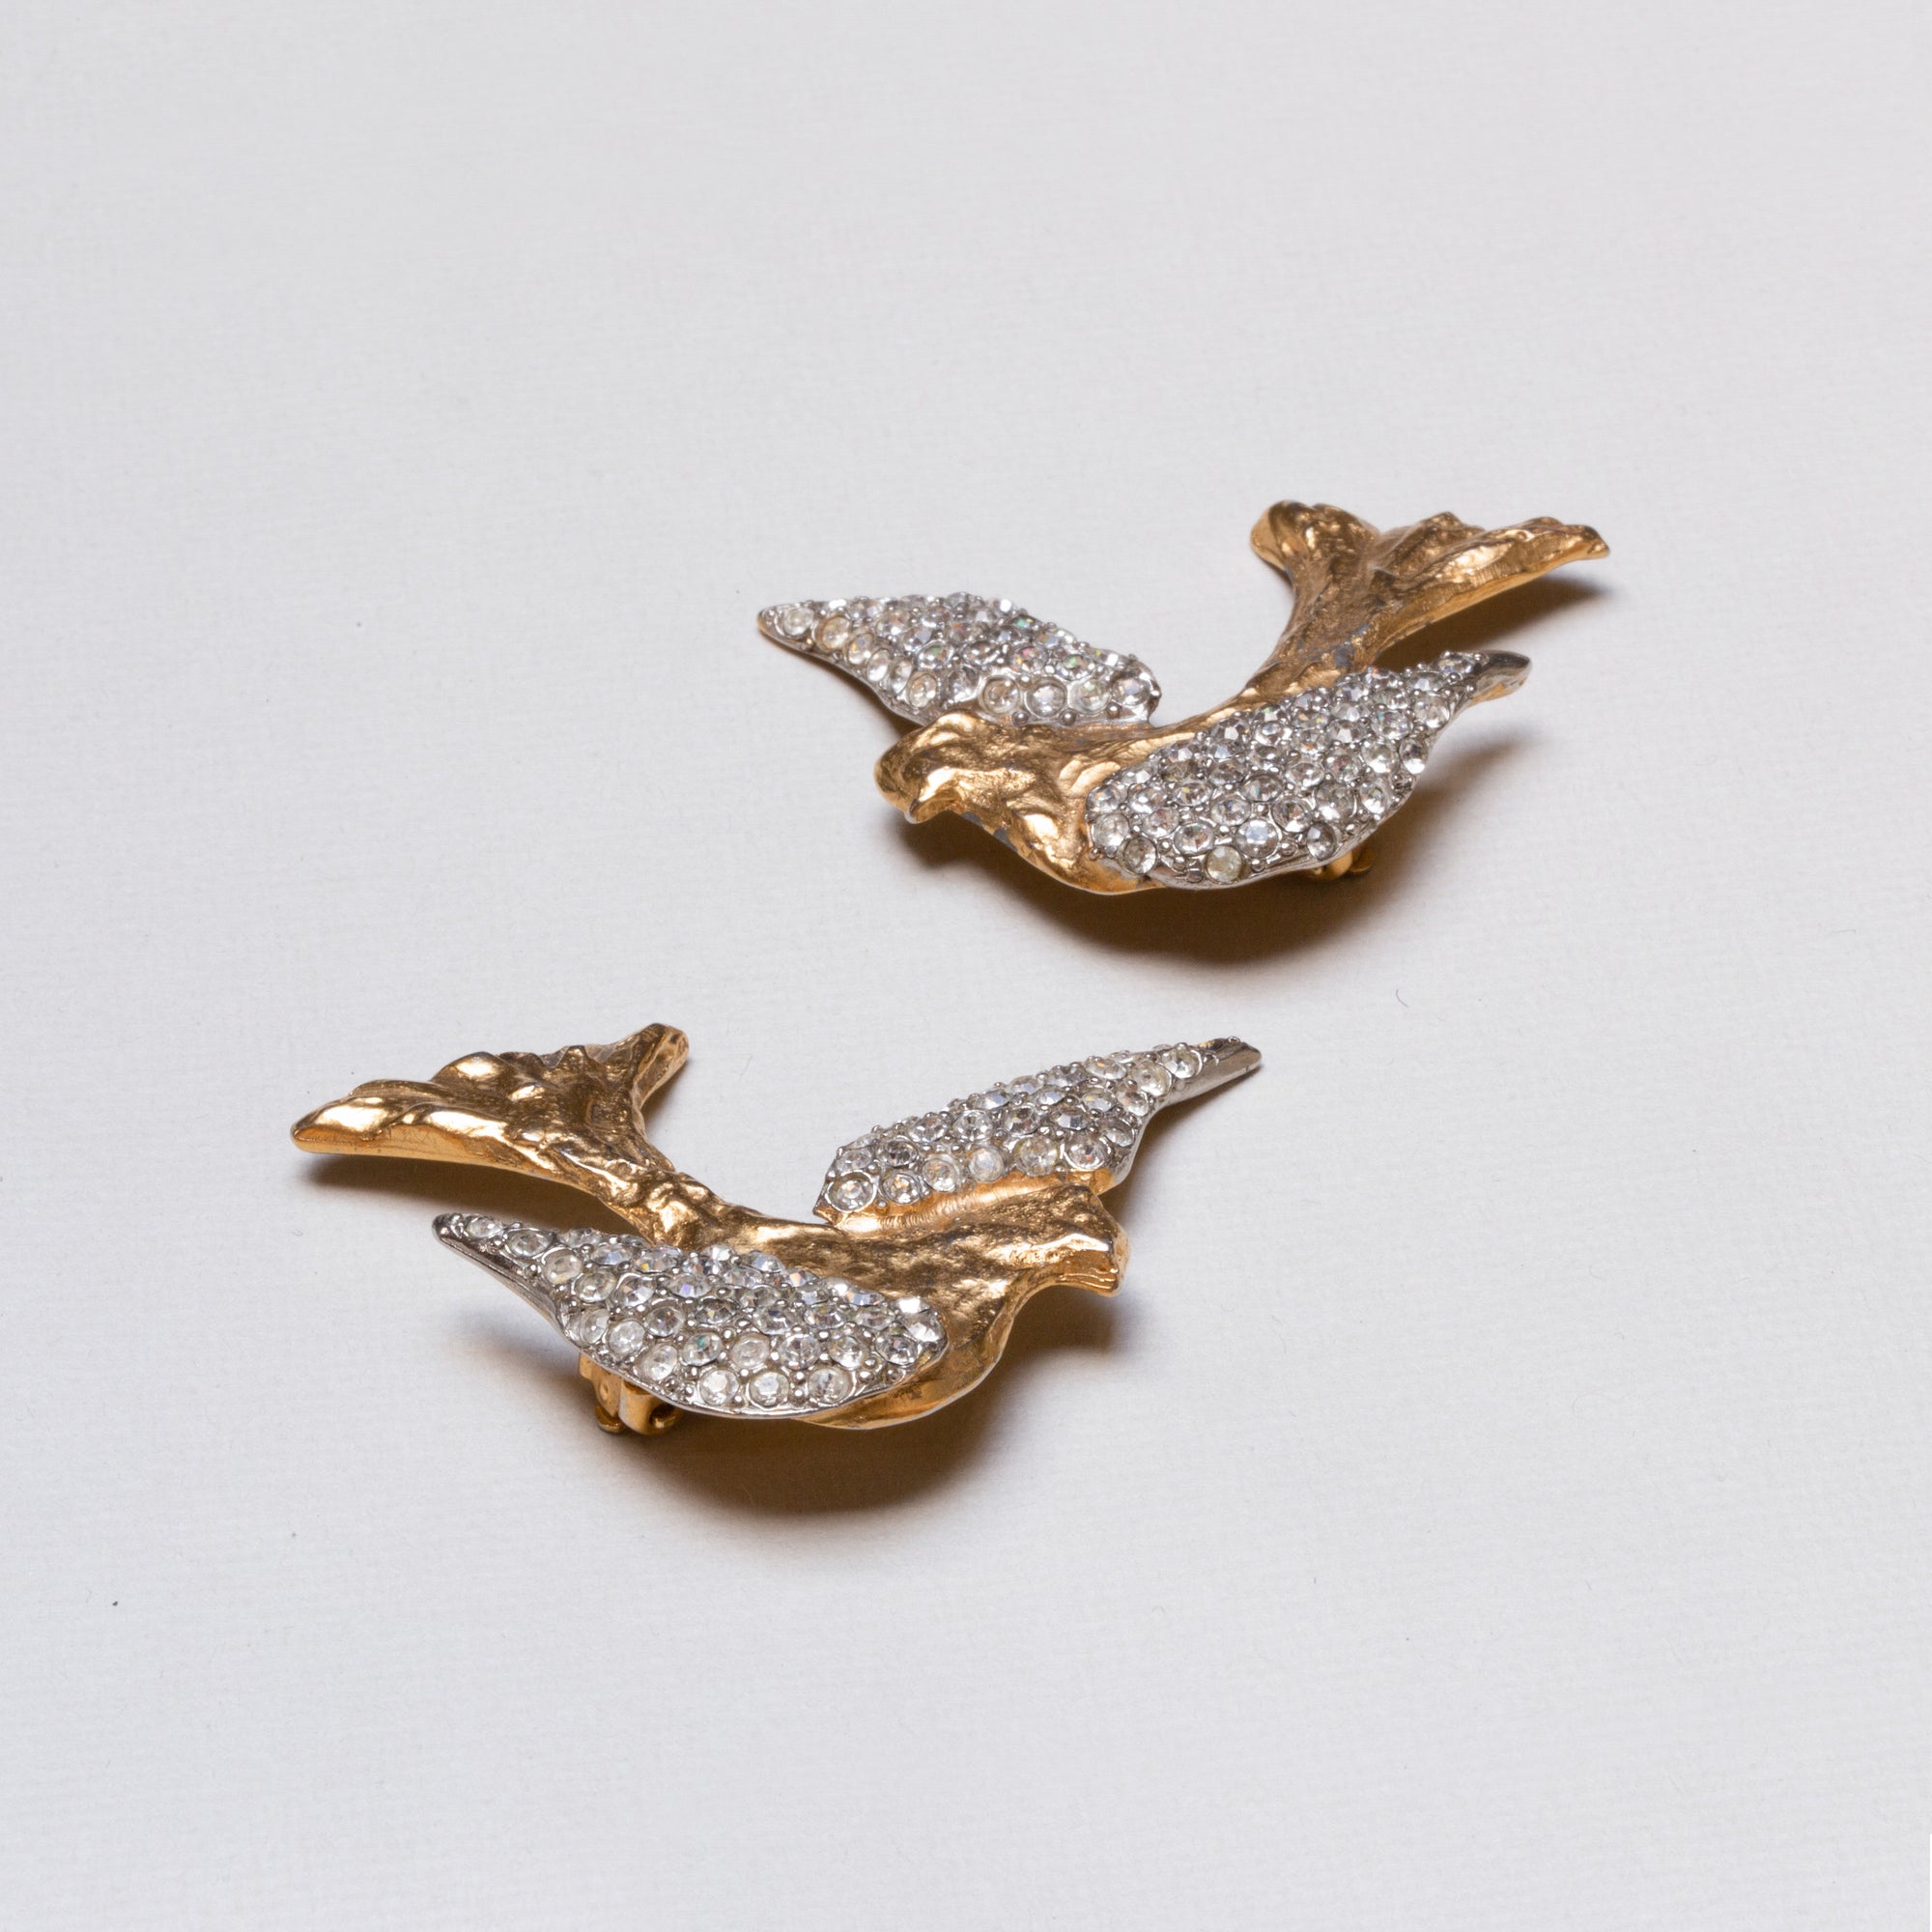 Vintage Pair of Gold Birds Brooches with Rhinestones